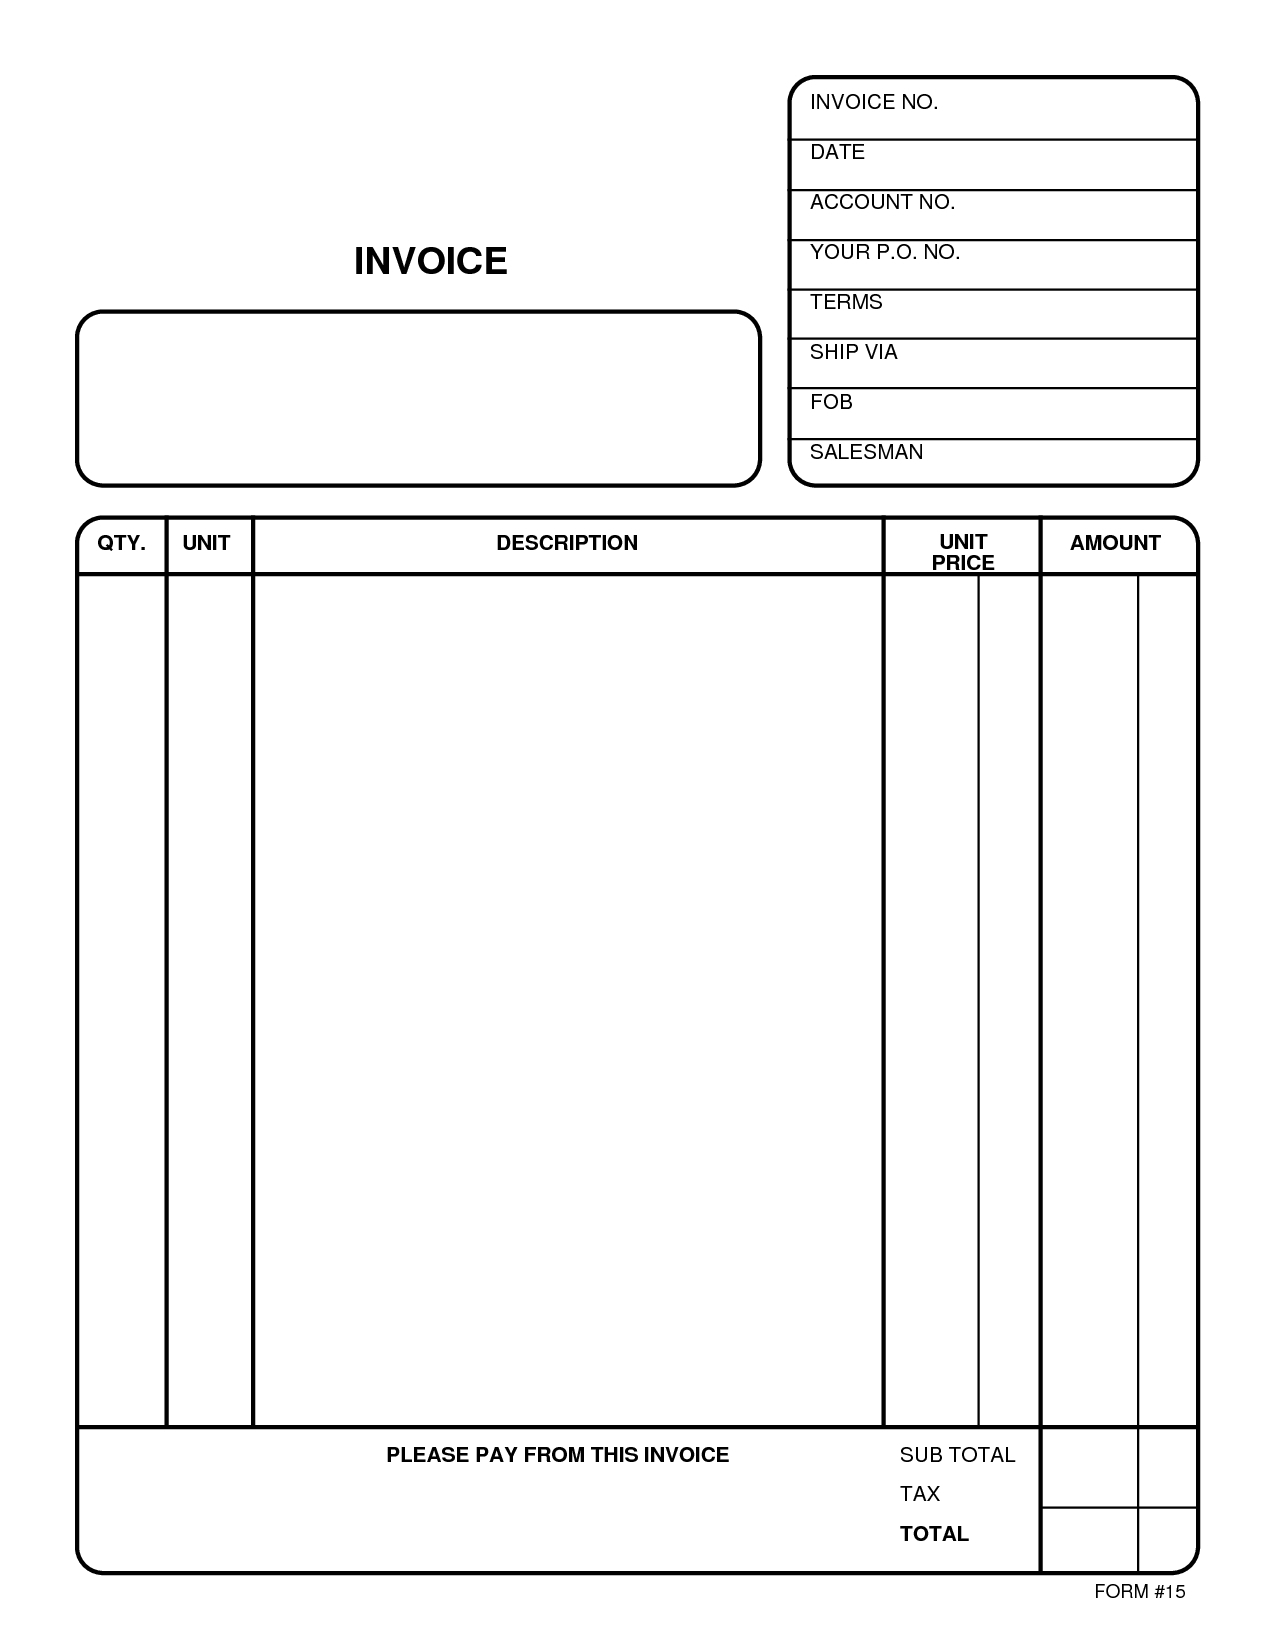 samples of invoices hardhost free invoice samples